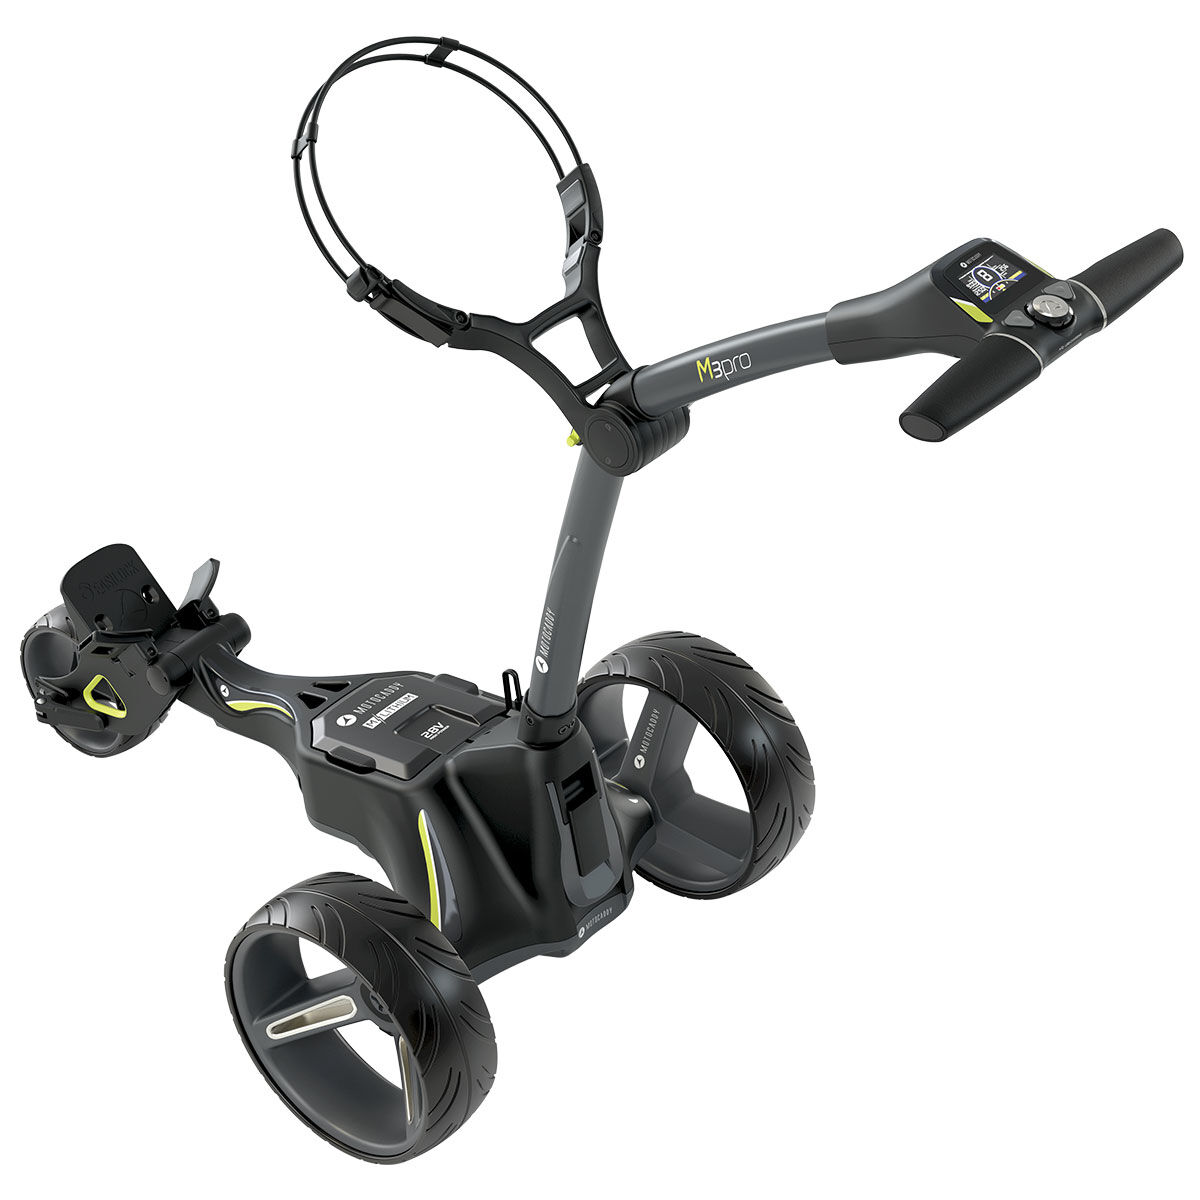 Motocaddy Grey M3 Pro Extended Range Lithium Electric Golf Trolley (with Accessories & 36 Hole Battery), Size: 650x470x410mm| American Golf von Motocaddy